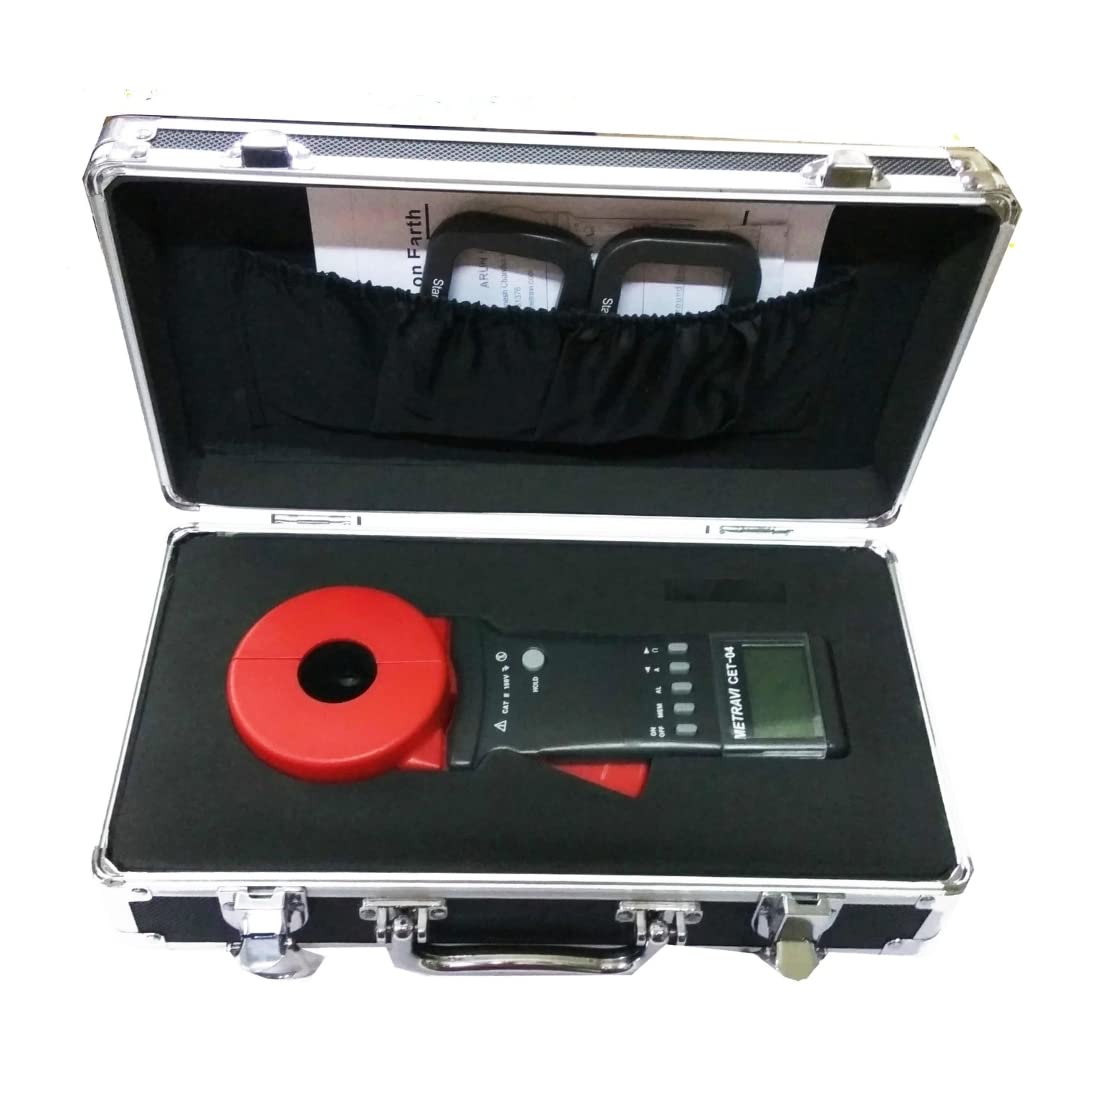 Metravi CET - 04 Clamp On Ground Resistance Tester Range 0.01Î© to 1500Ohm & Leakage Current Measurement up to 20A